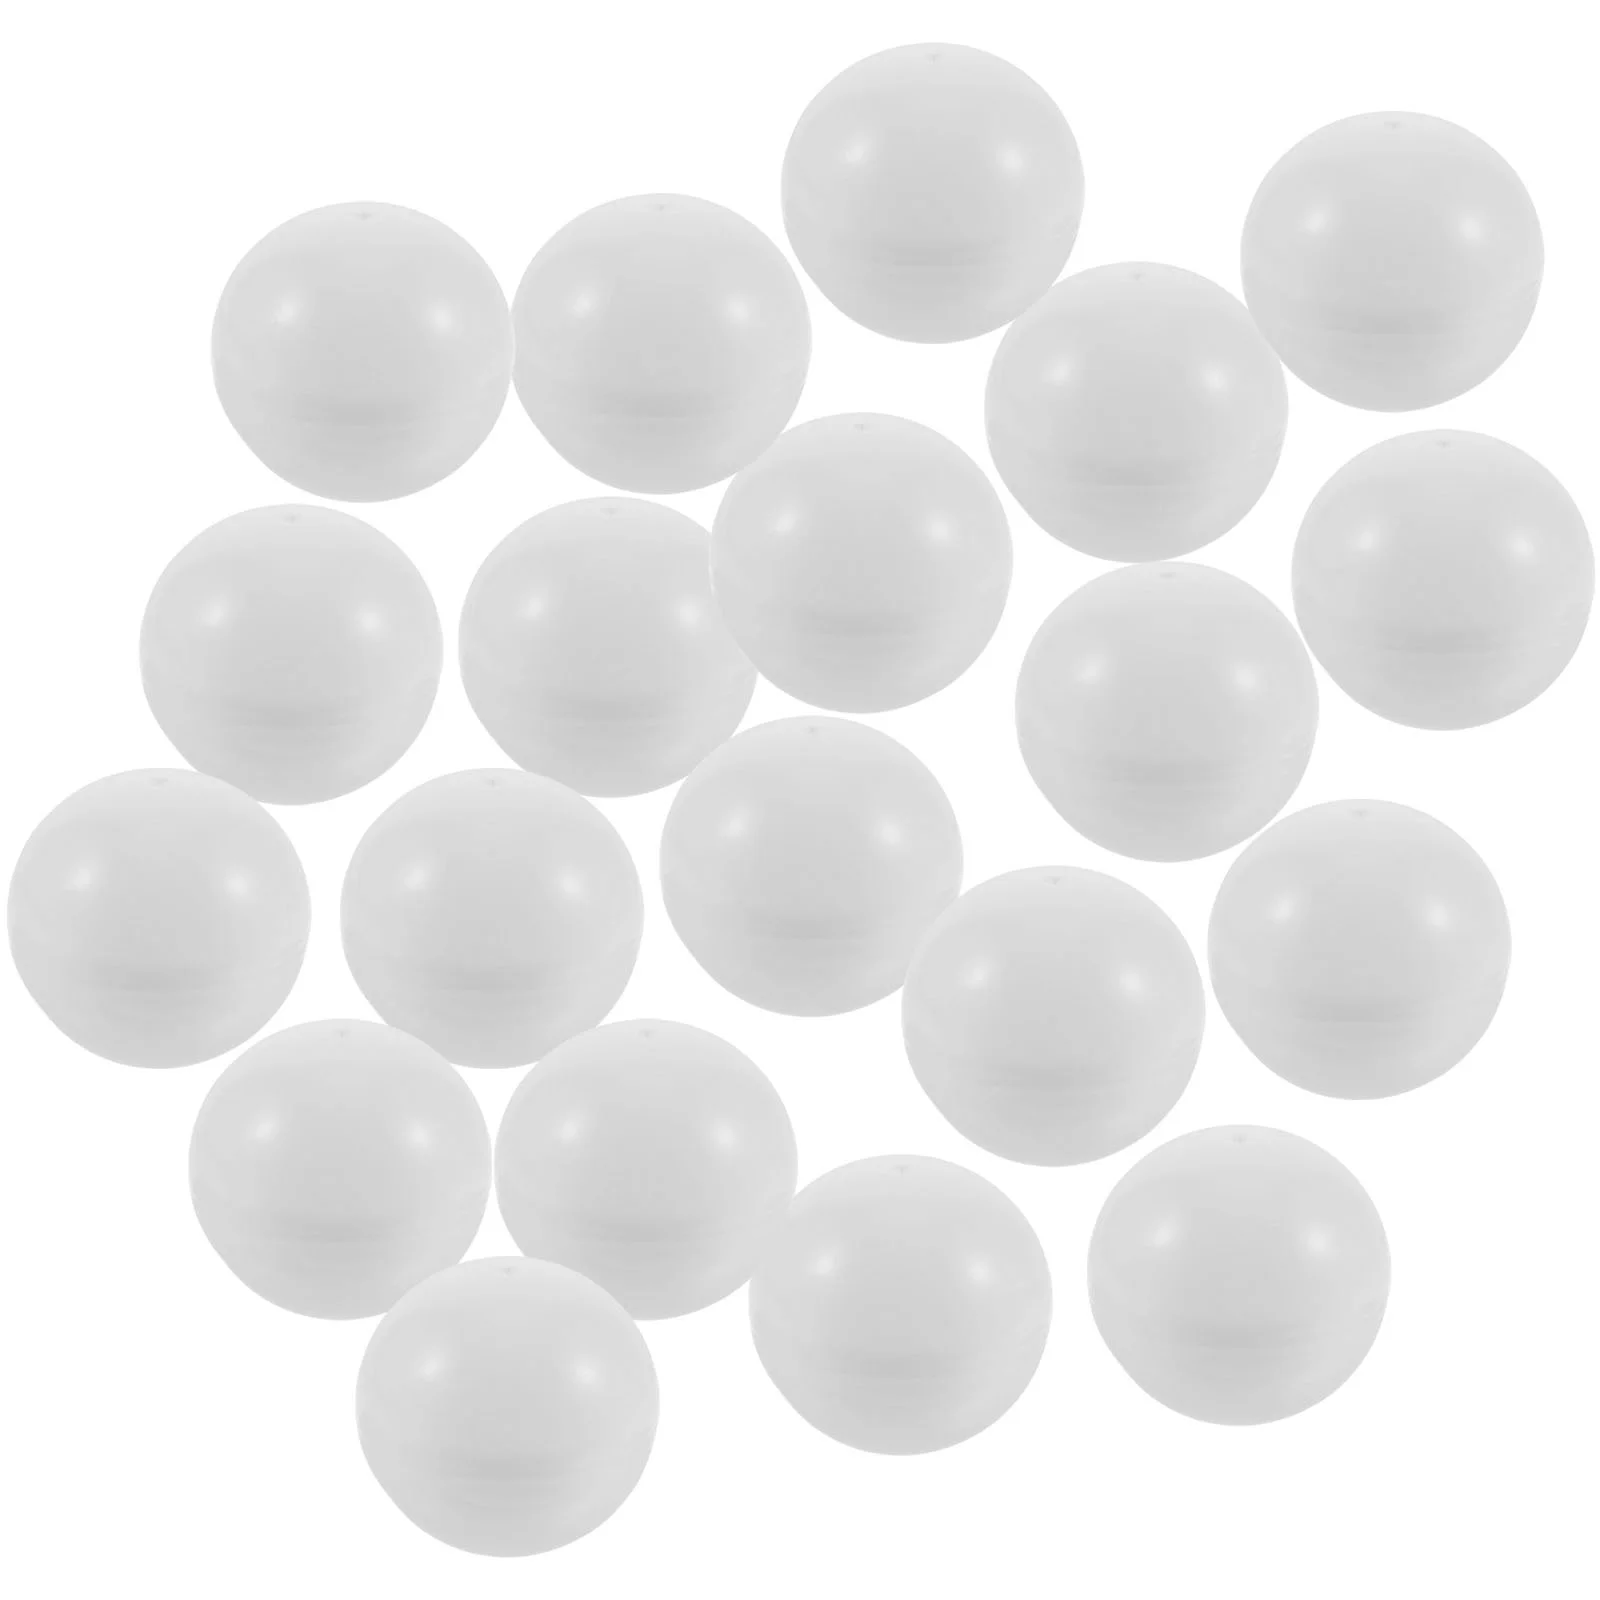 

25 Pcs Lottery Ball Interesting Game Balls Plastic Sphere Party Activity Pingpong